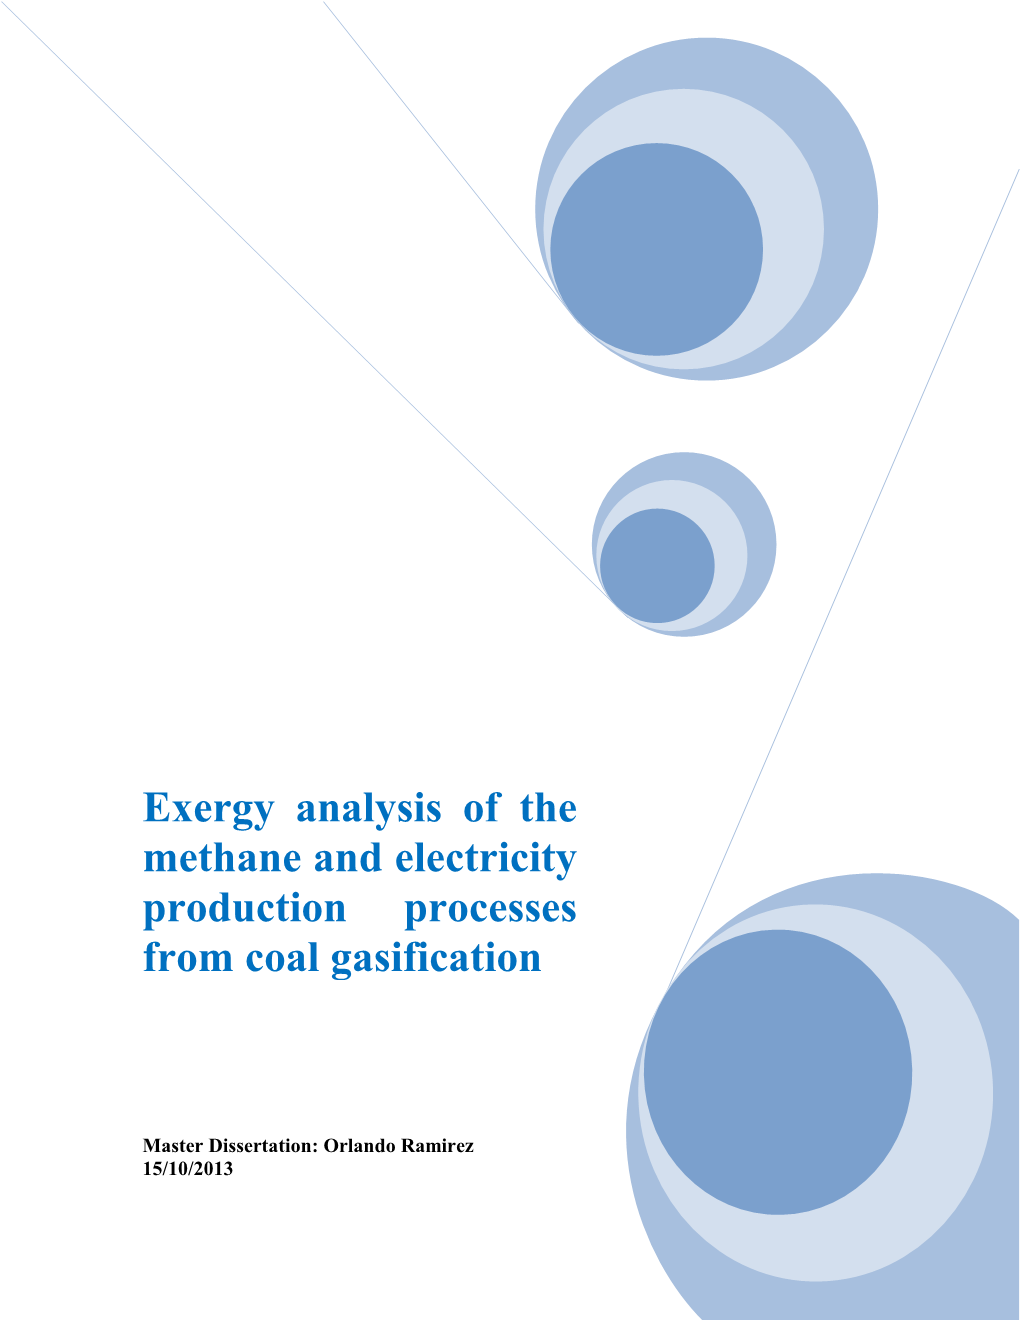 Exergy Analysis of the Methane and Electricity Production Processes from Coal Gasification